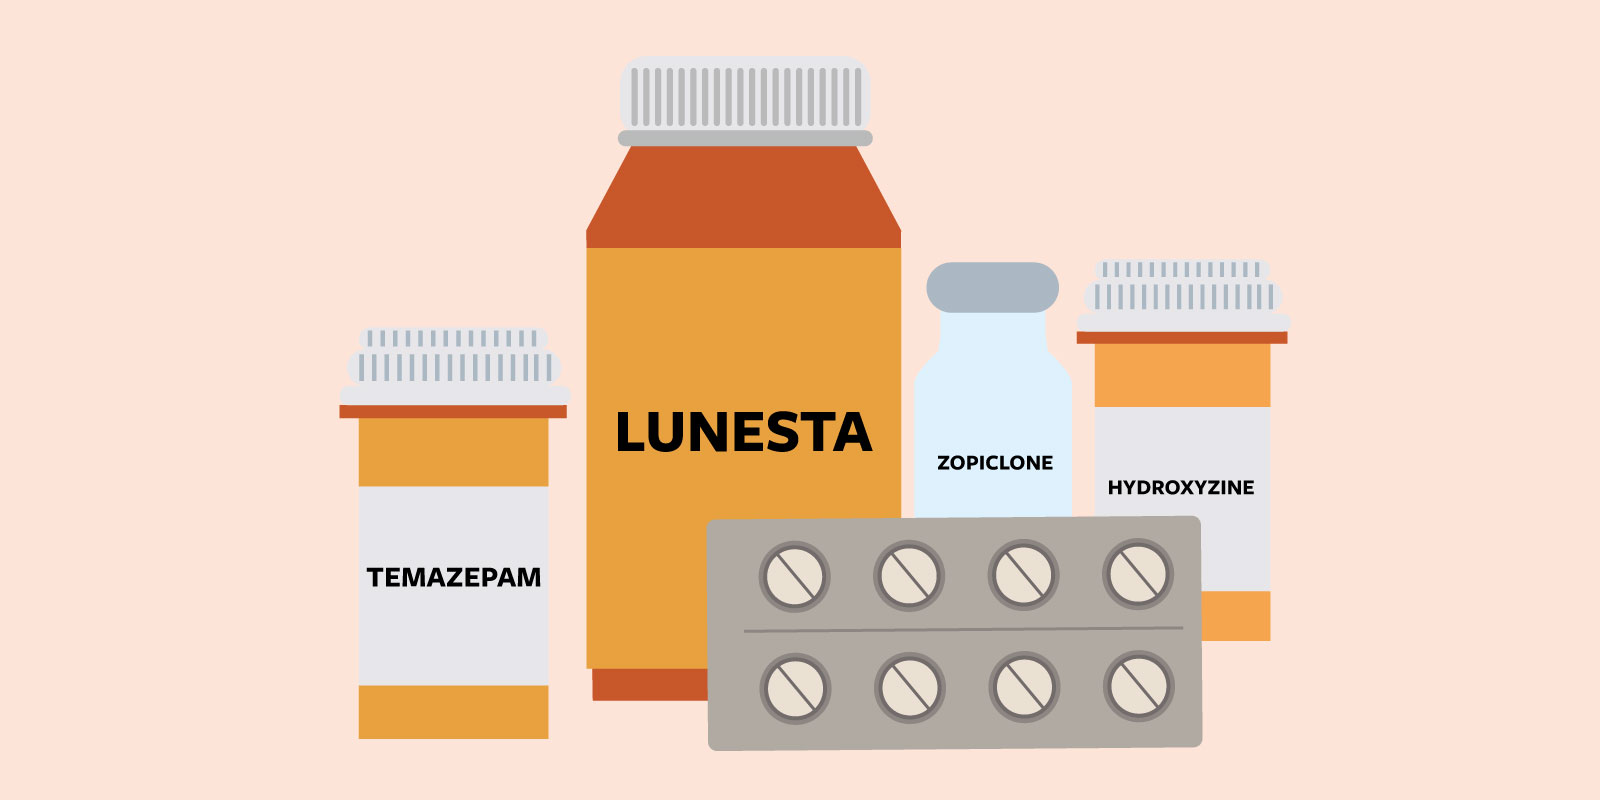 Lunesta for sleep: A selection of drugs used for sleep including Lunesta, temazepam, zopiclone and hydroxyzine.